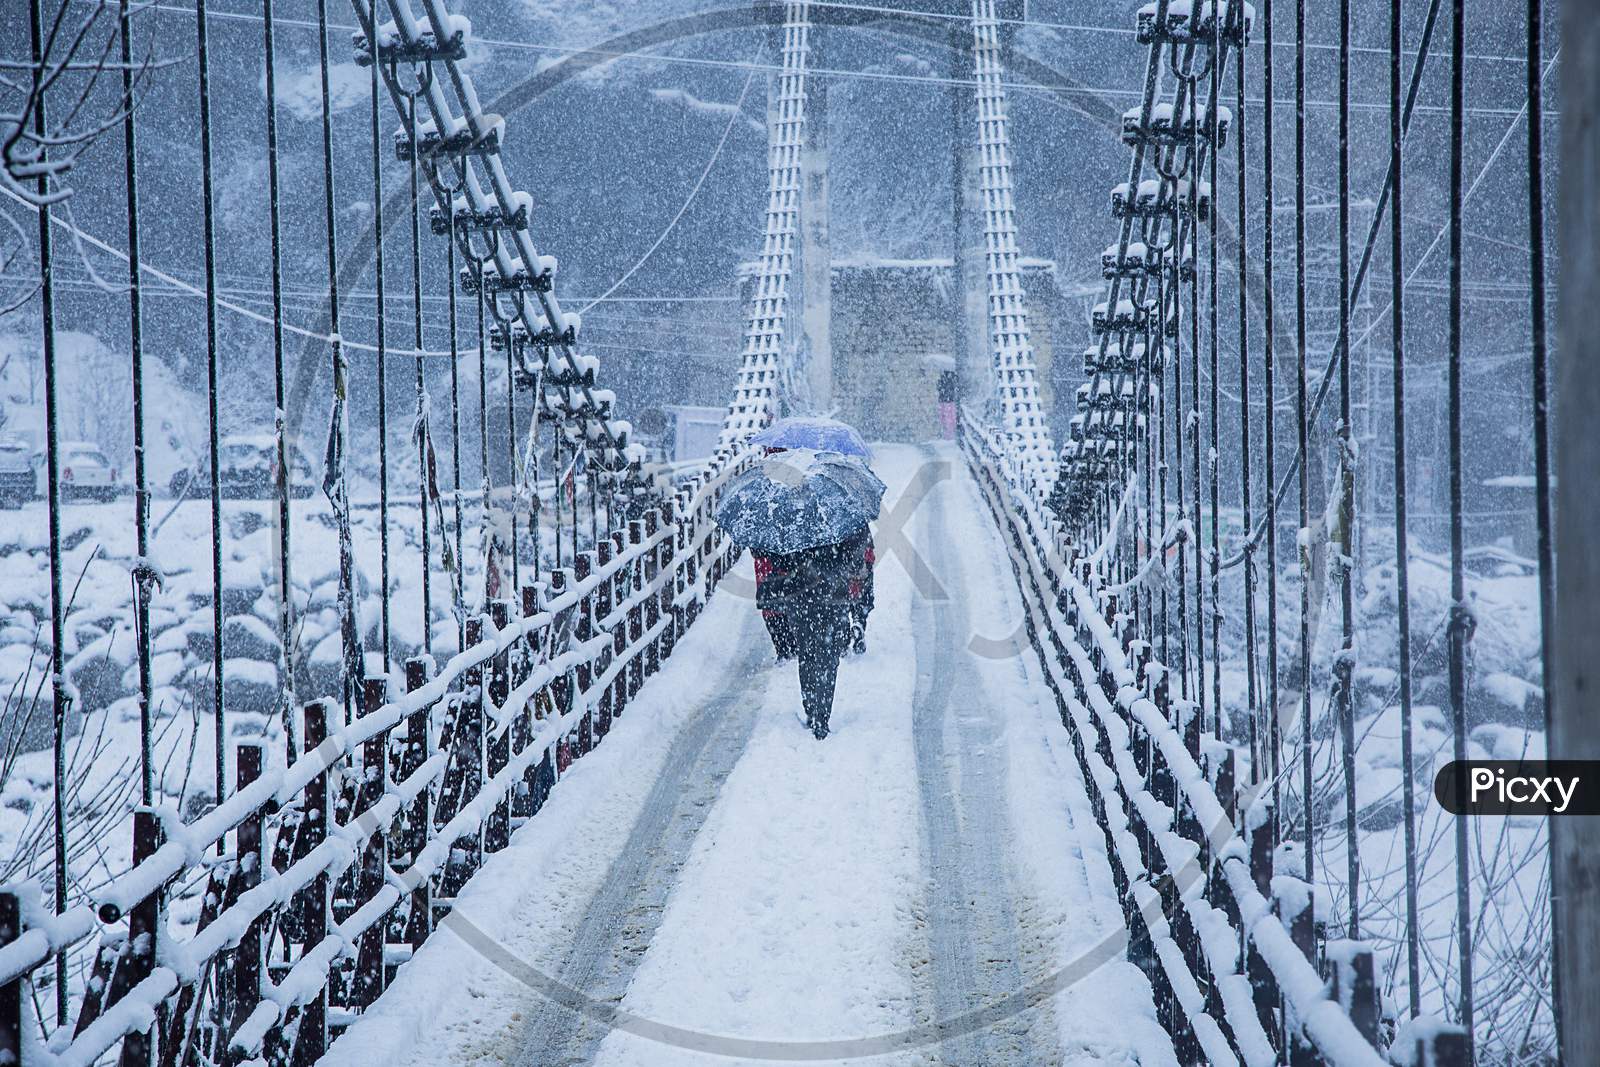 Heavy Winter Snow Fall, A Person Walking Alone With Black Umbrella On The Bridge, Wide Angle Shot - Image